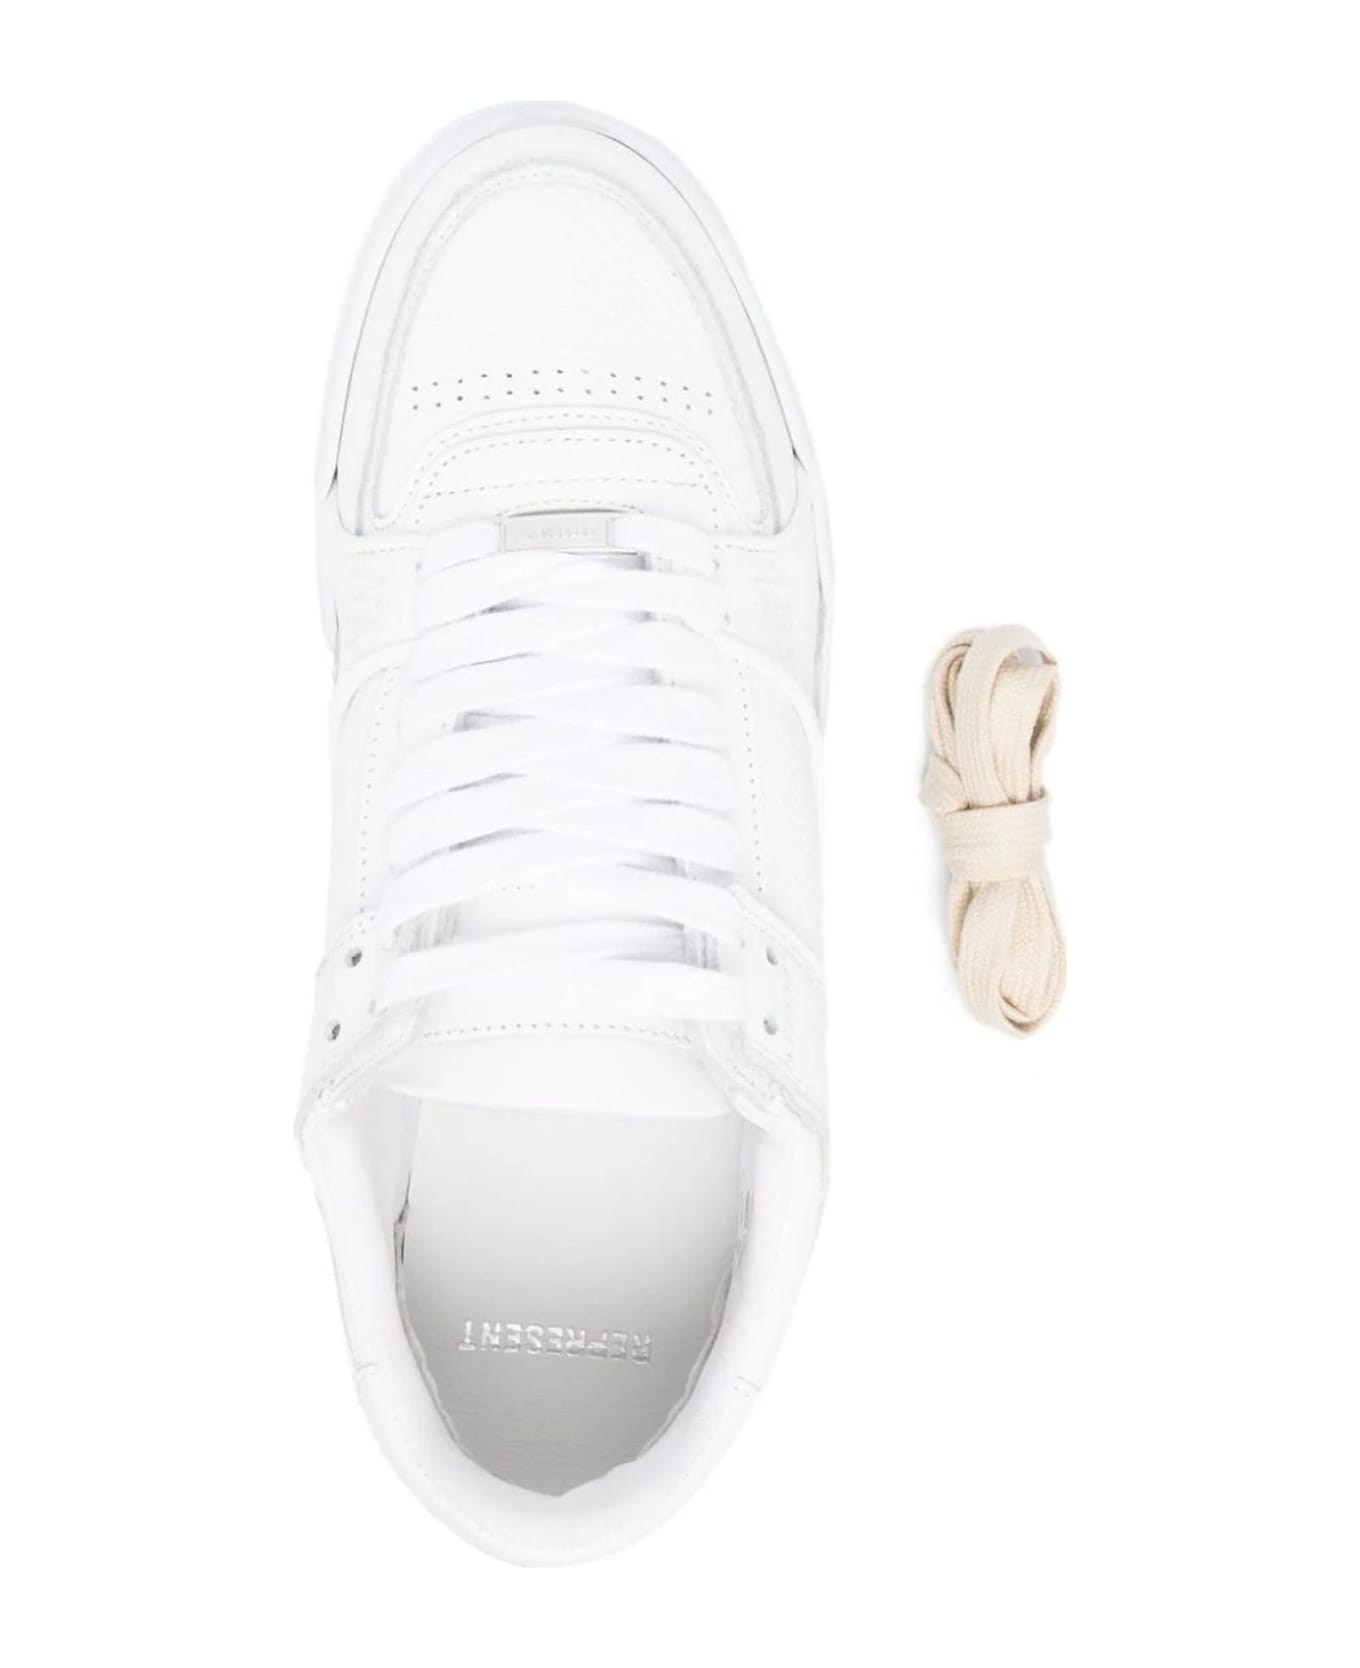 REPRESENT White Calf Leather Apex Sneakers Sneakers - FLAT WHITE スニーカー